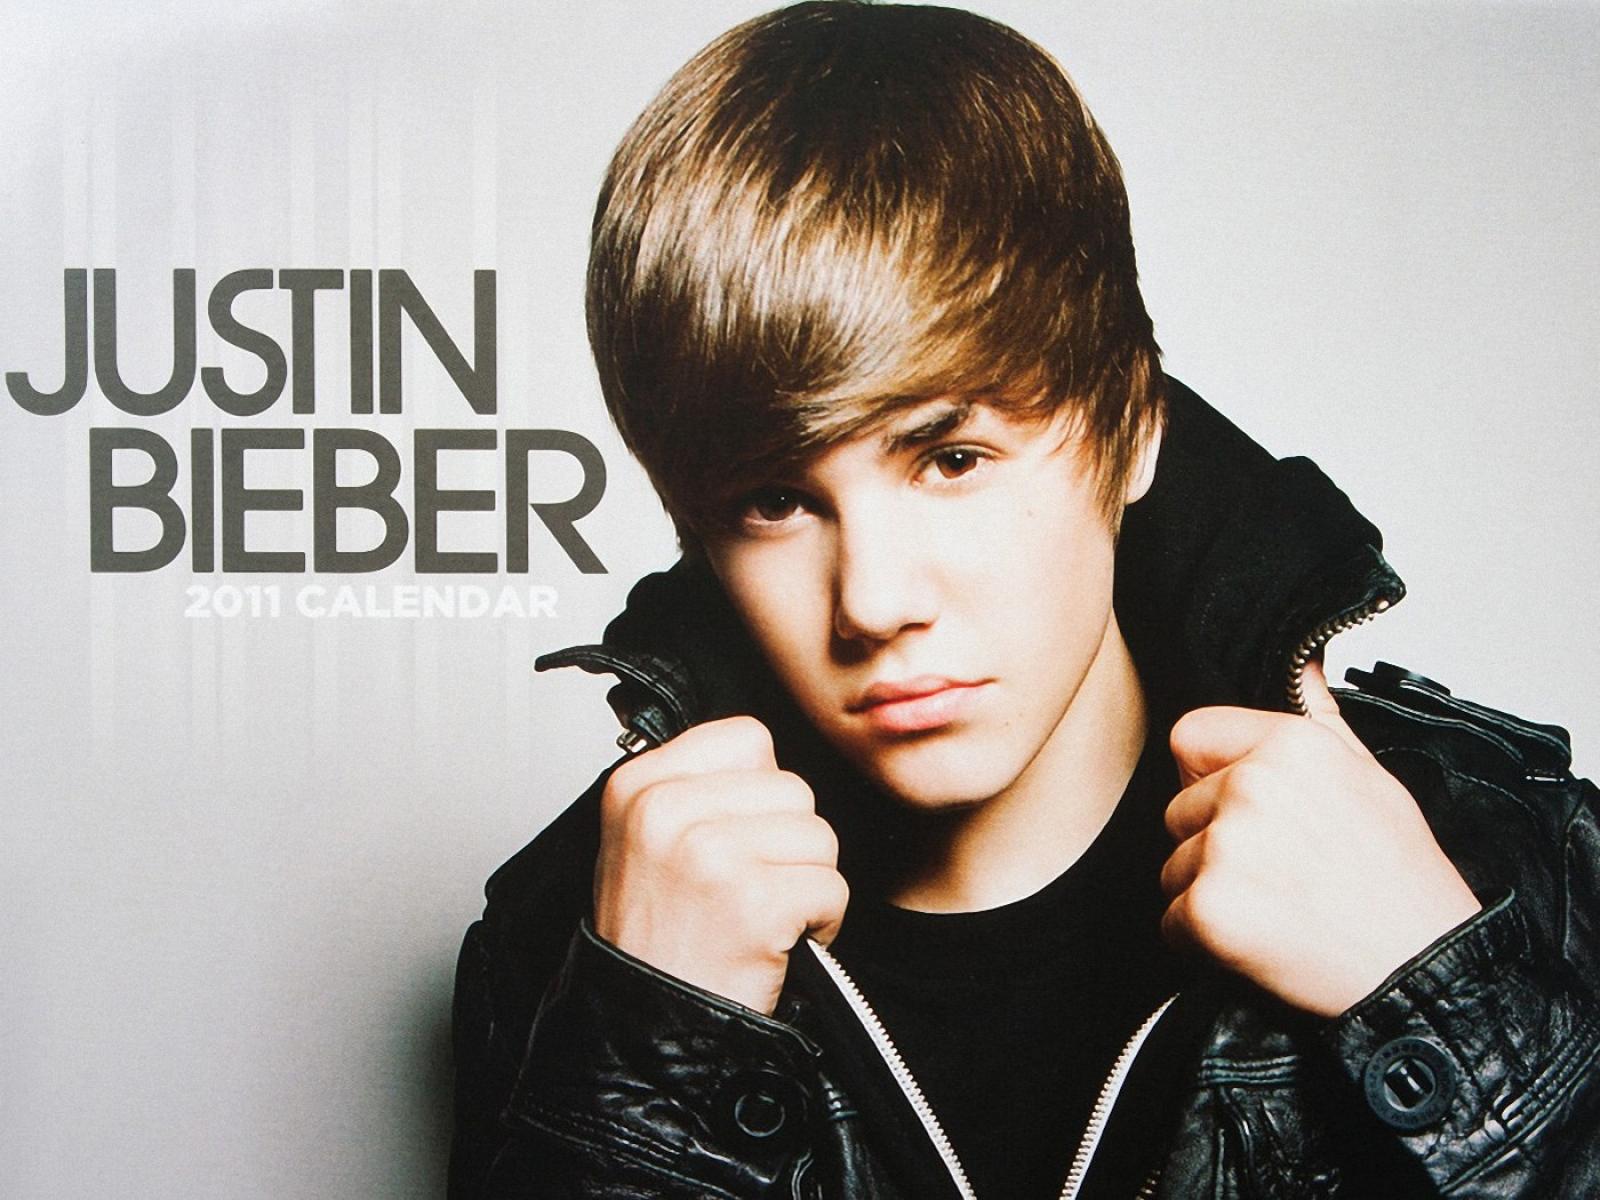 Justin Bieber Wallpapers and pictures on Pinterest Justin Bieber